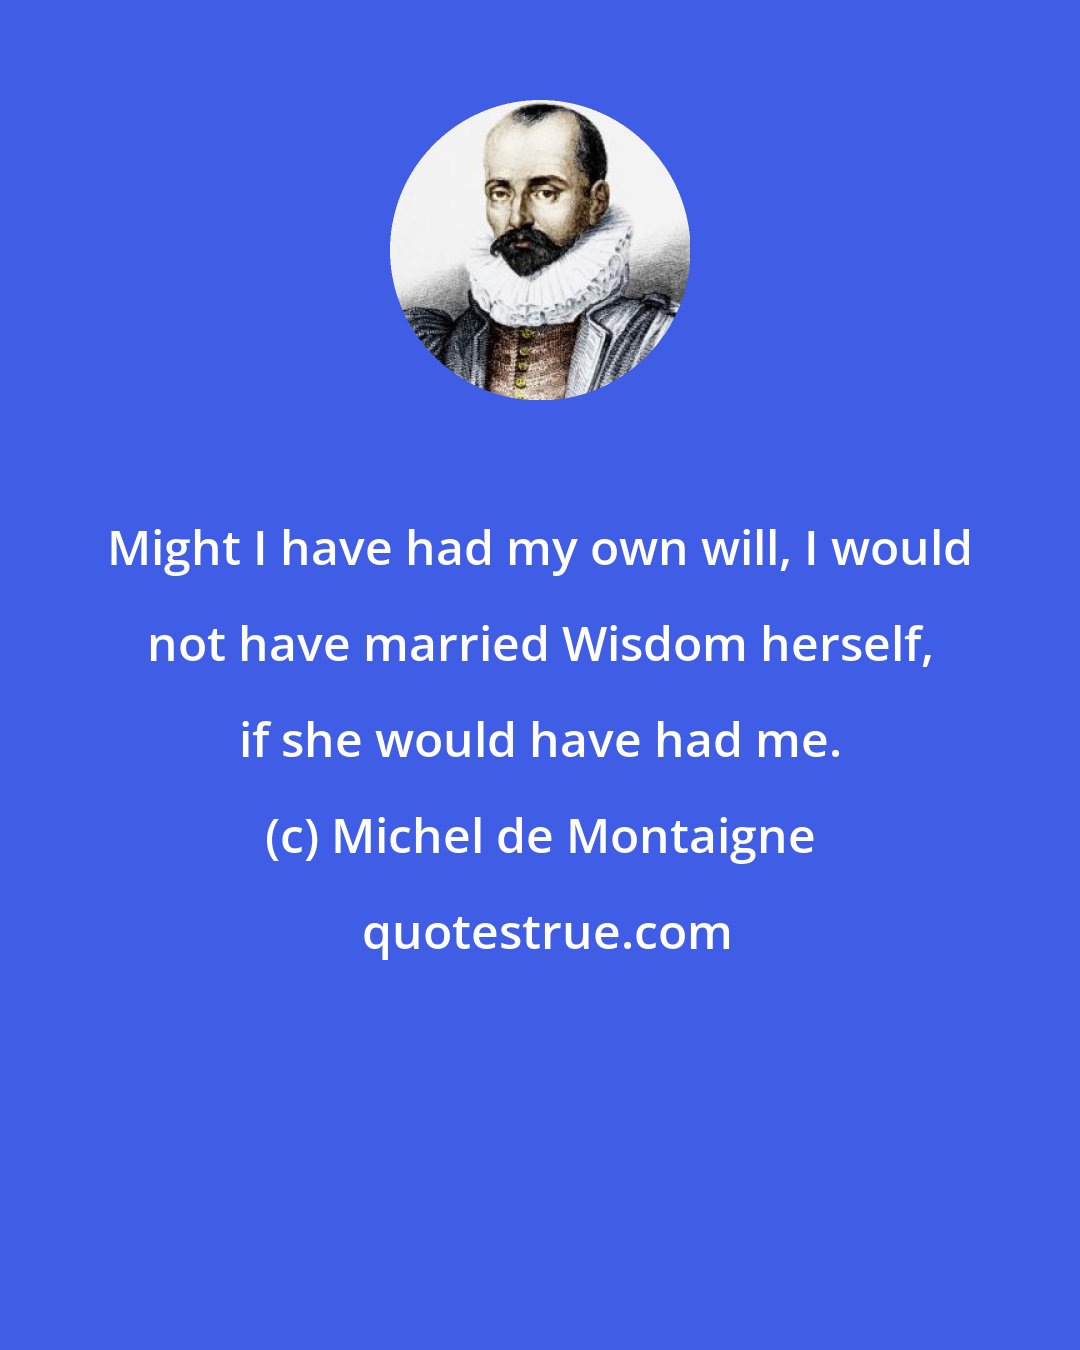 Michel de Montaigne: Might I have had my own will, I would not have married Wisdom herself, if she would have had me.